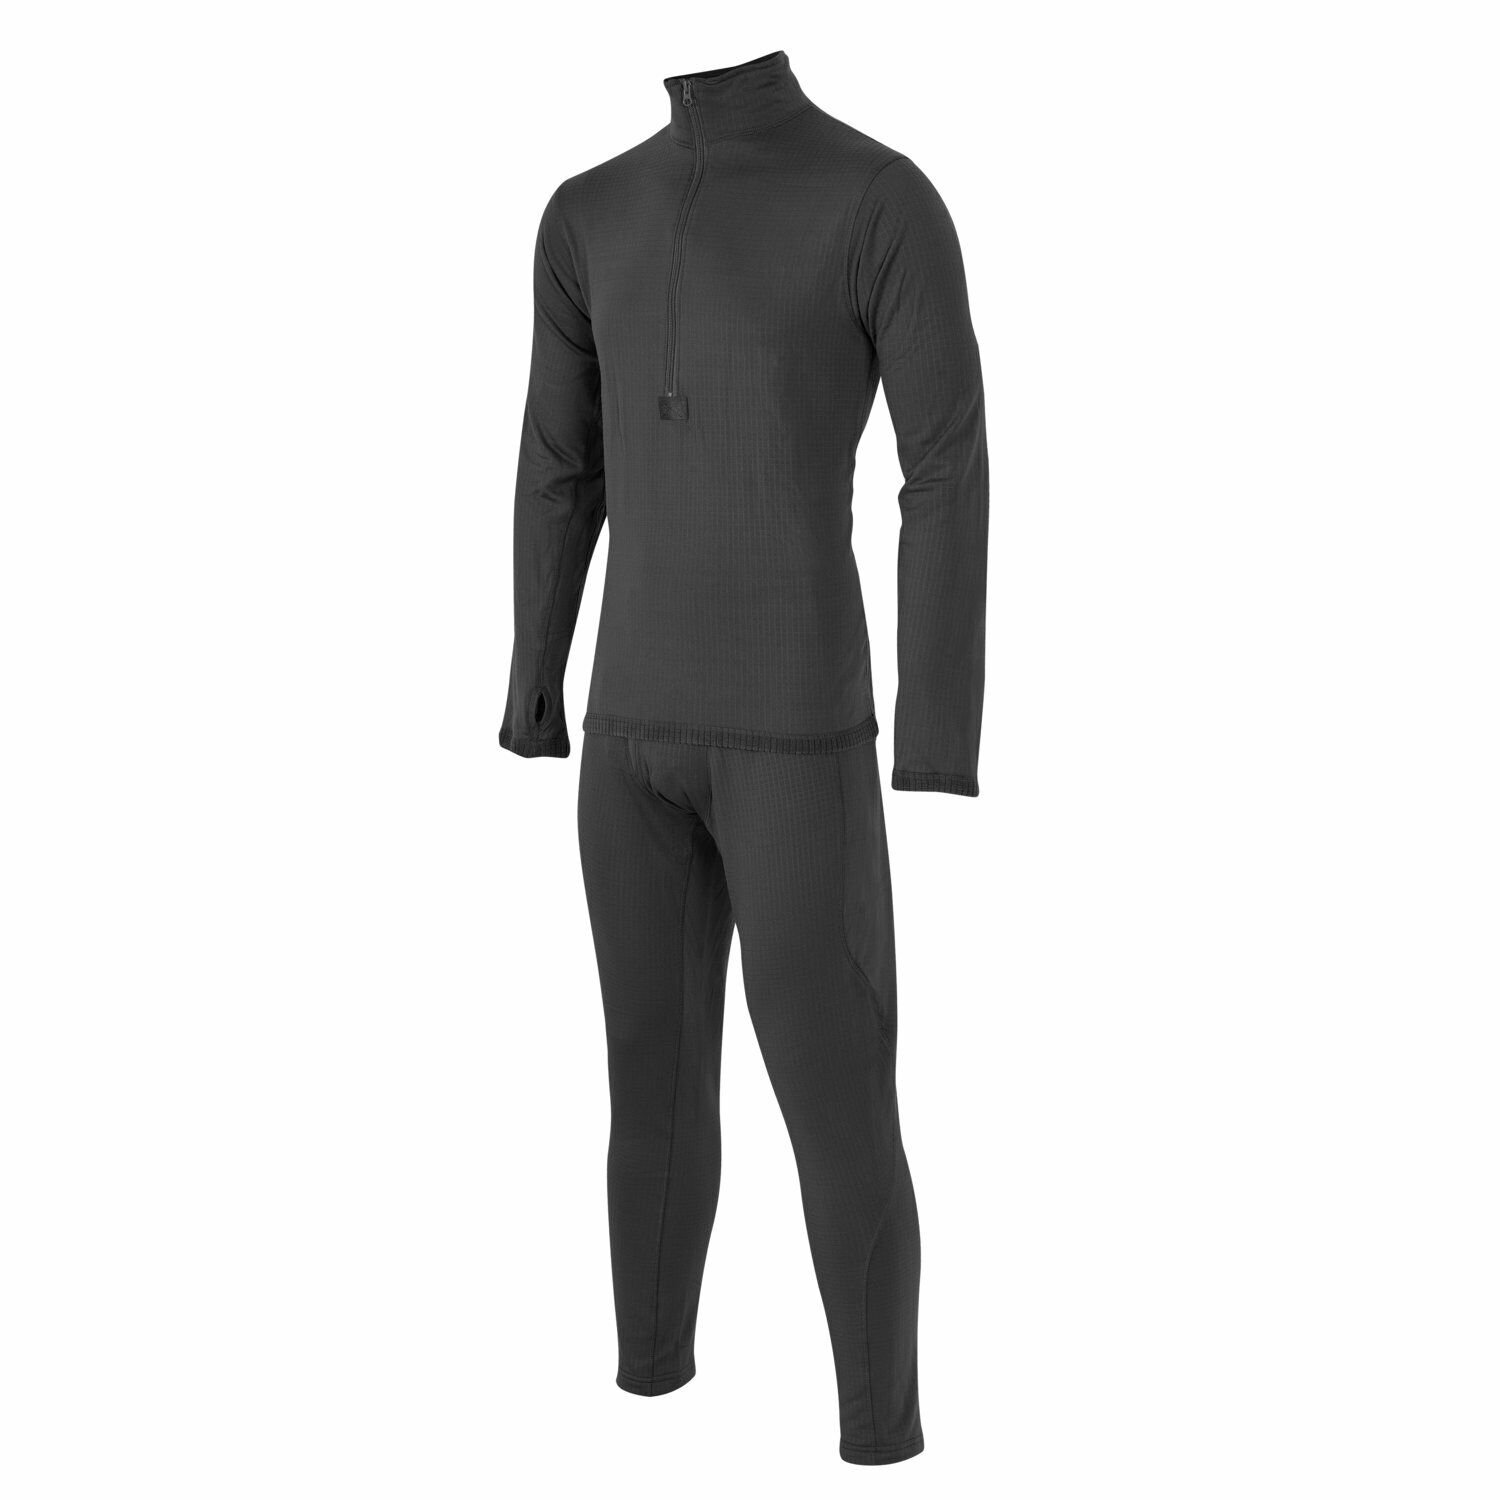 Helikon-Tex UNDERWEAR US Level 2 LVL Army Military Tactical Thermal FULL SET